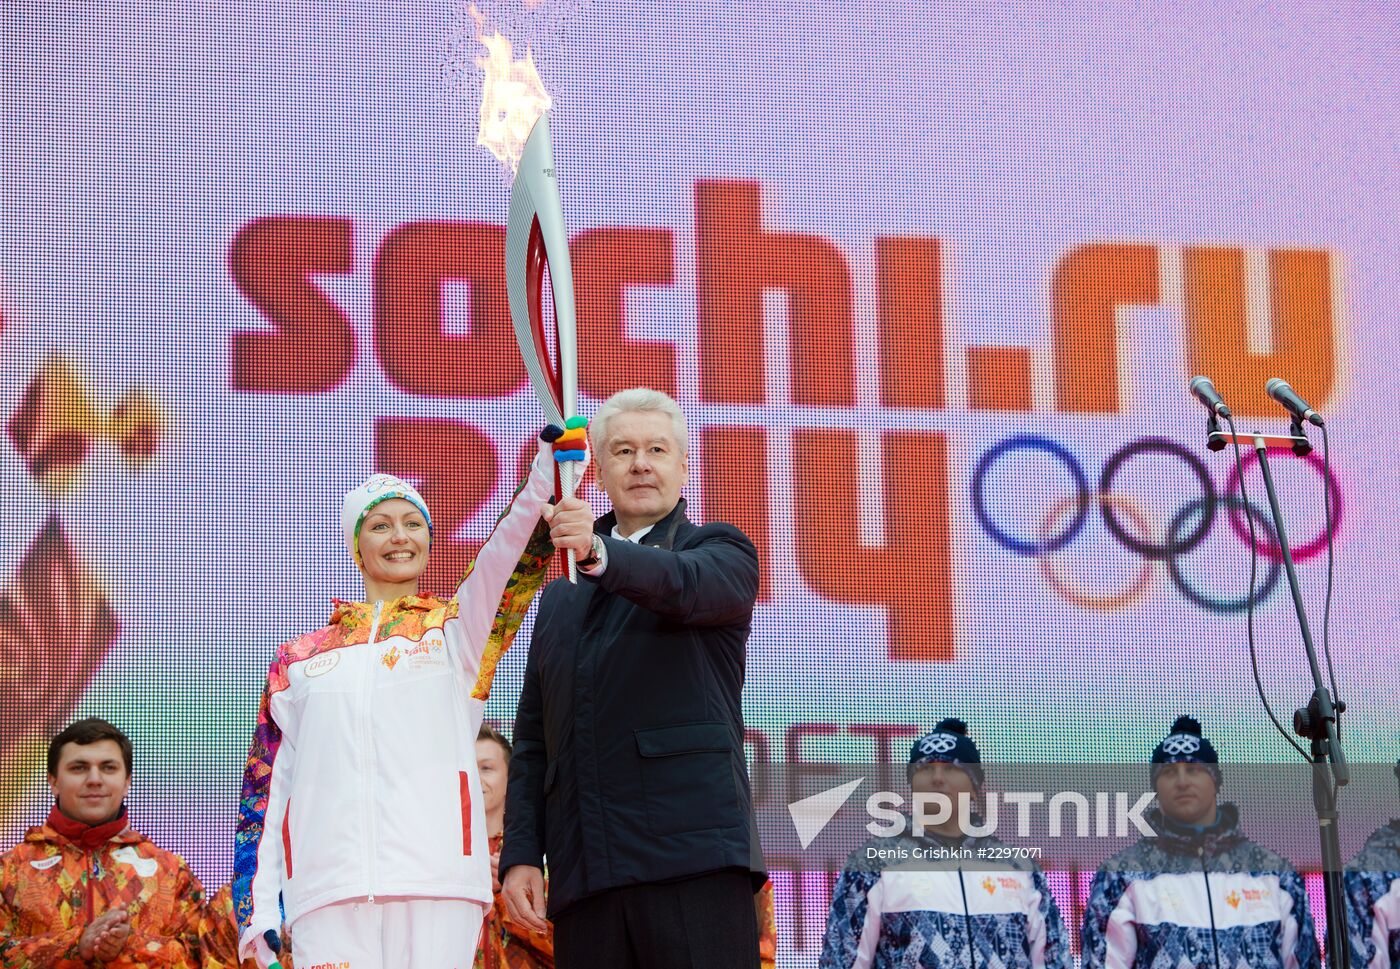 Moscow Mayor Sergei Sobyanin participates in Olympic torch relay